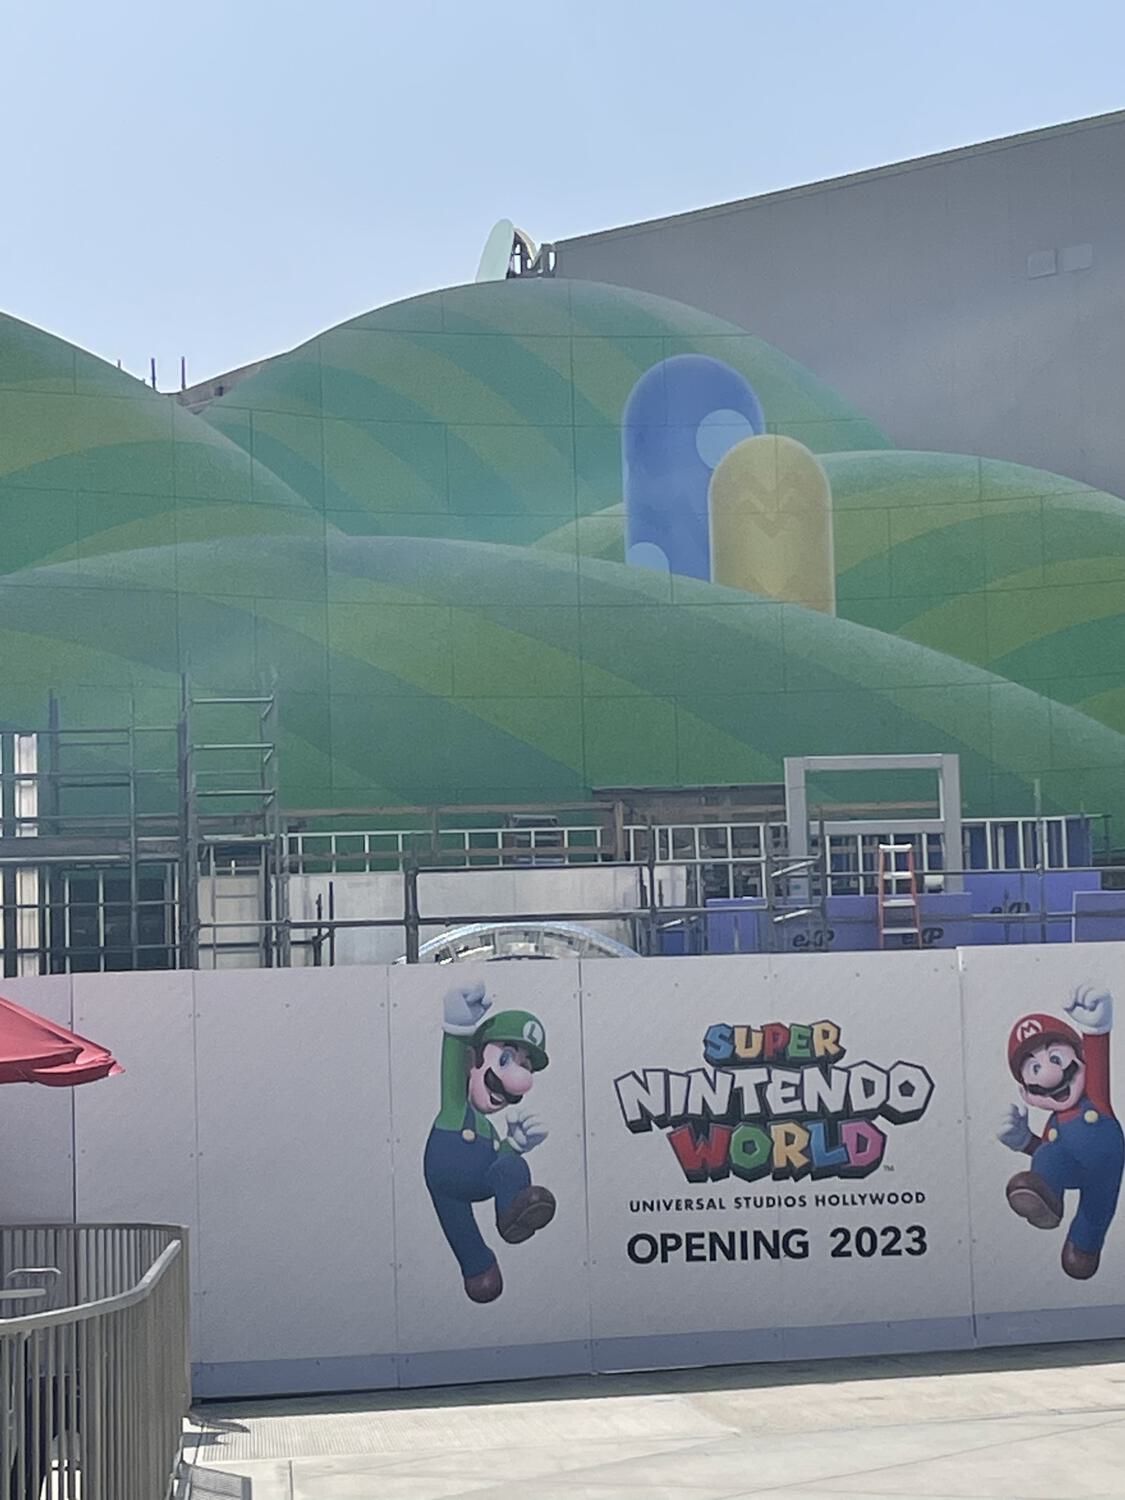 A construction wall reading "Super Nintendo World / Universal Studios Hollywood / Opening 2023," with unfinished green cartoon hills and scaffolding rising behind them